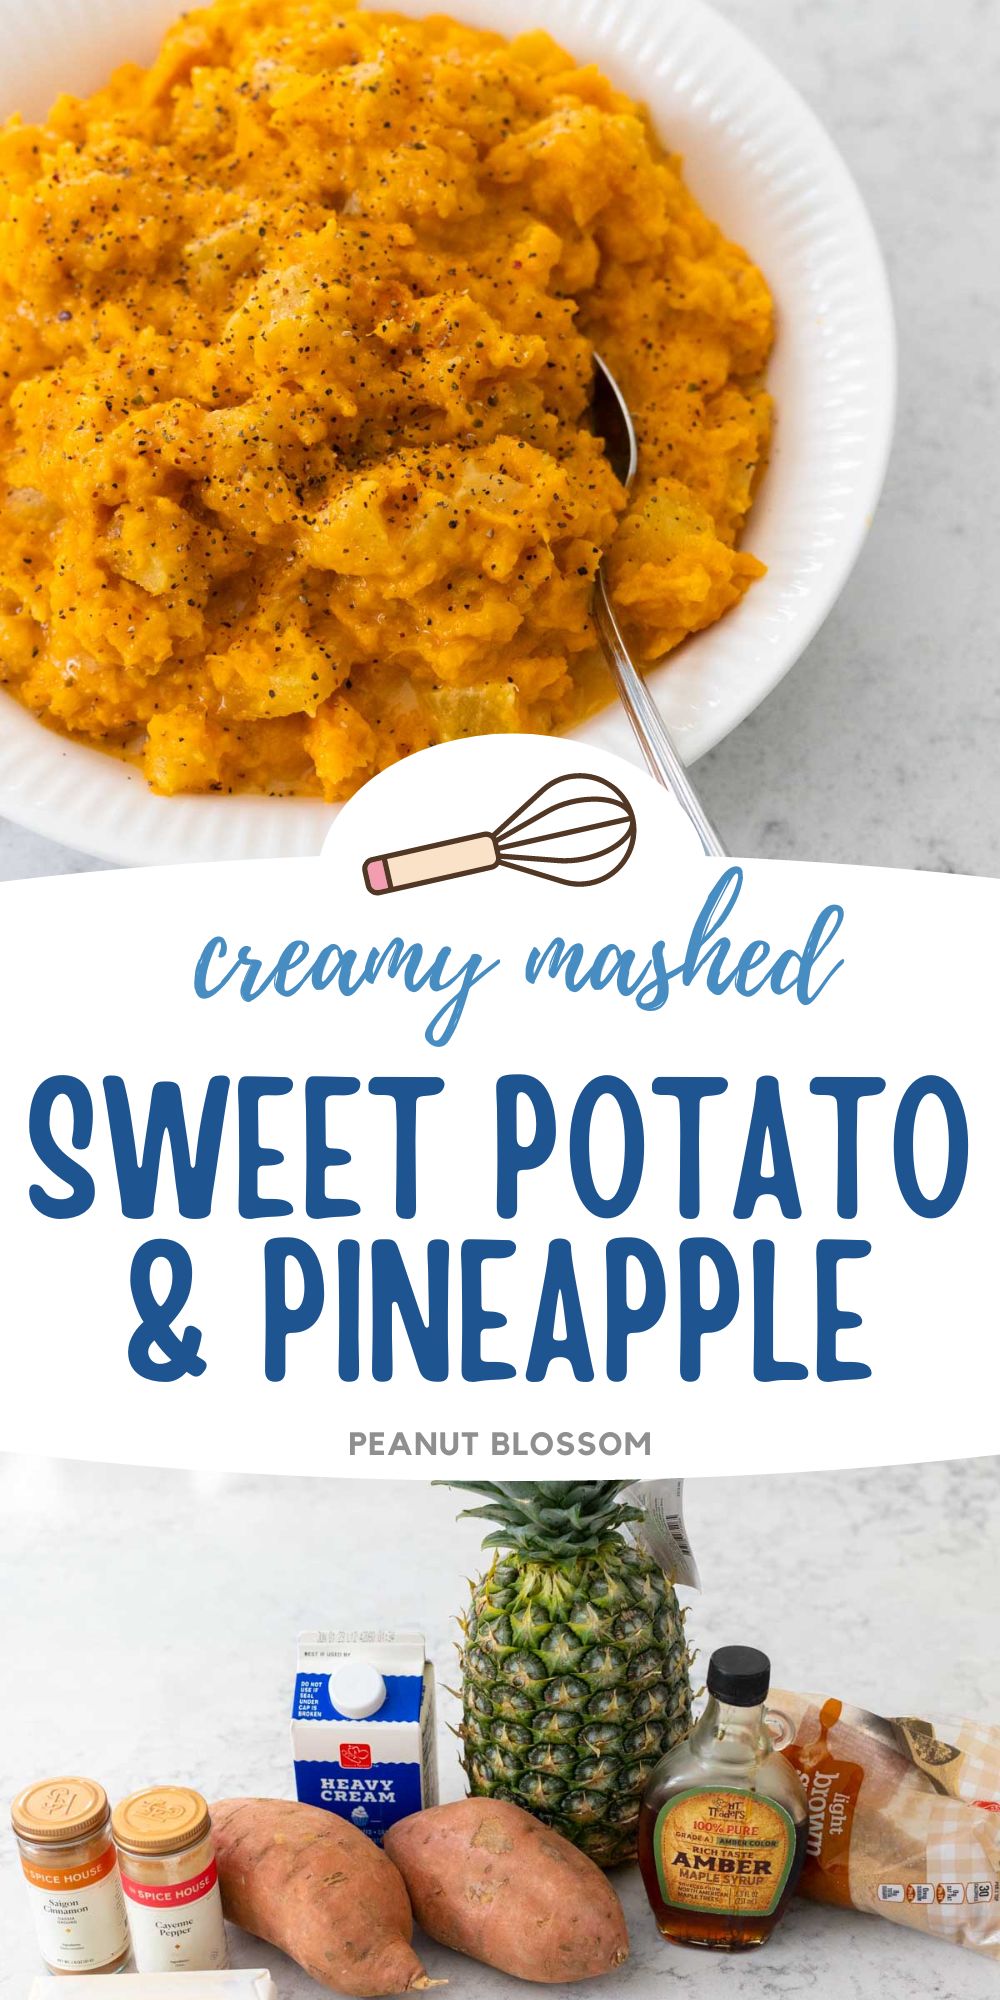 The photo collage shows a bowl of the mashed sweet potato above the photo of all the ingredients to make it.